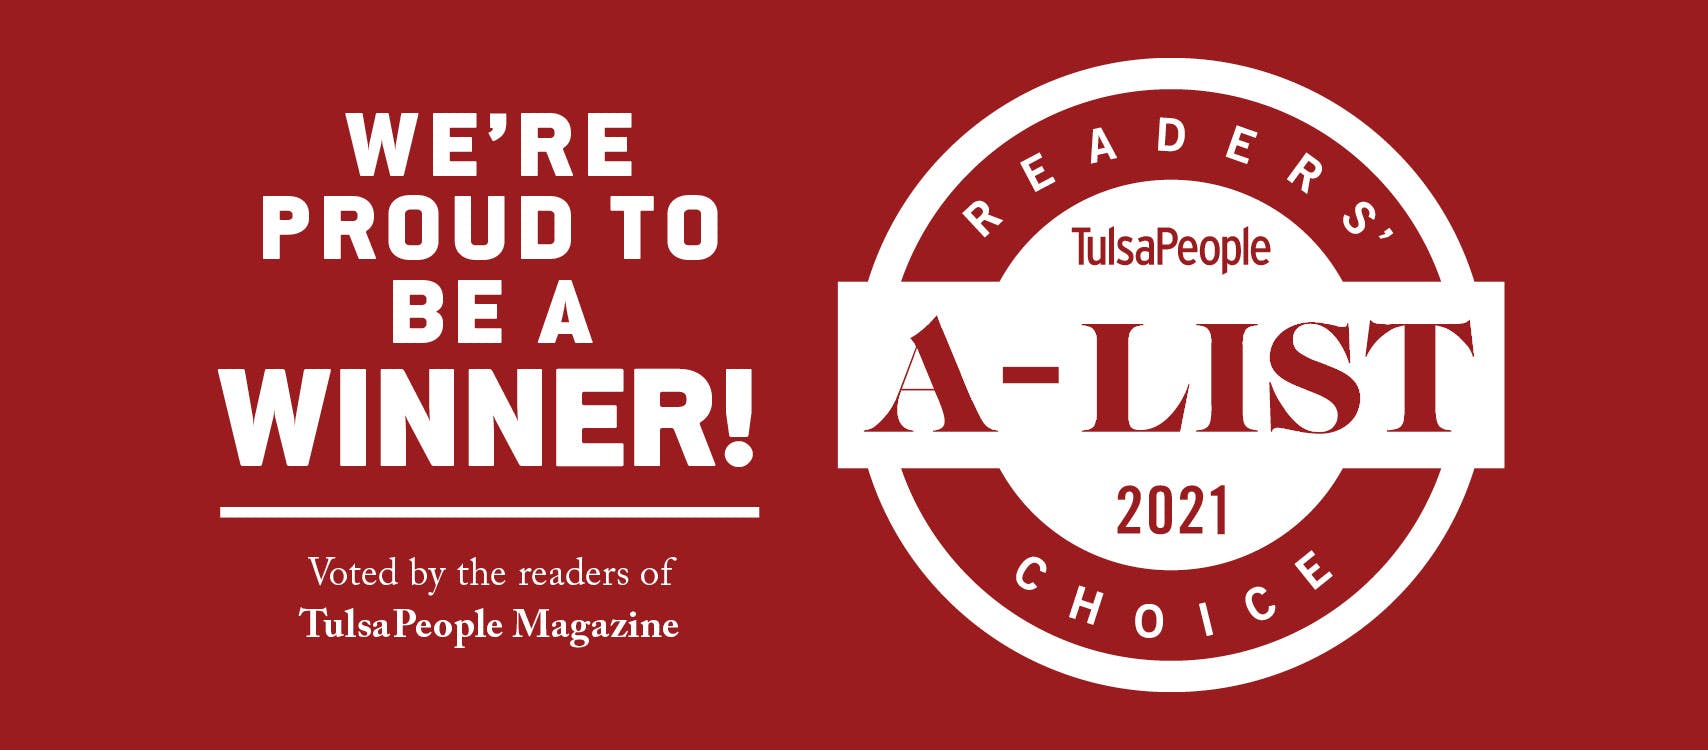 CONGRATULATIONS TO JIM NORTON TOYOTA FOR BEING A WINNER OF THE TULSA PEOPLE MAGAZINE READERS' CHOICE A-LIST!